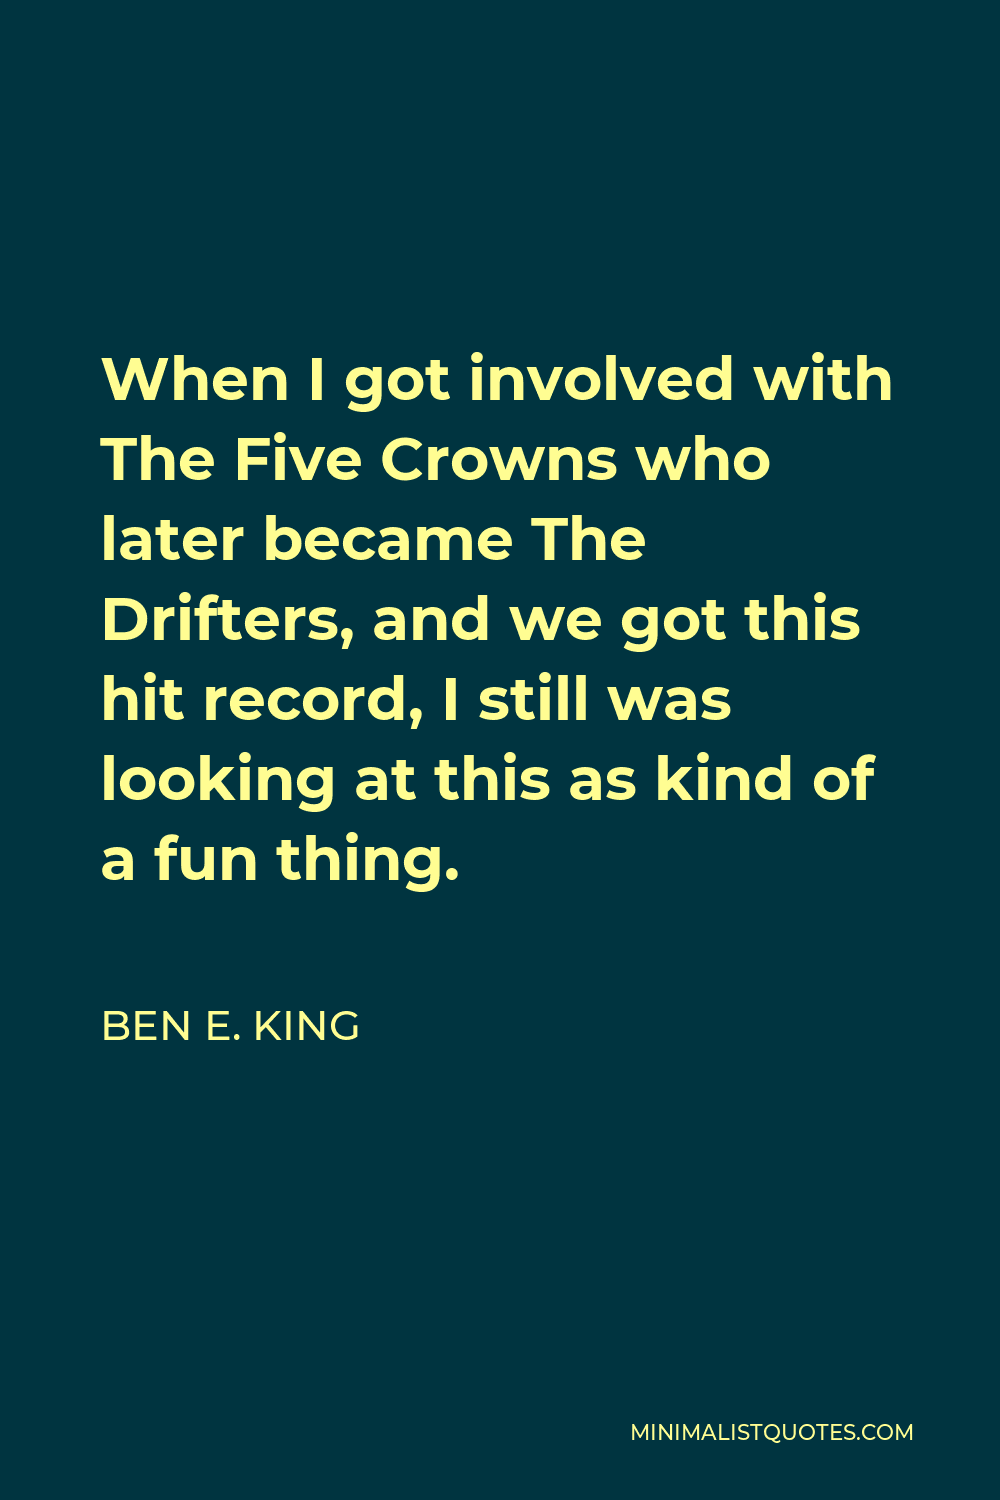 Ben E. King Quote - When I got involved with The Five Crowns who later became The Drifters, and we got this hit record, I still was looking at this as kind of a fun thing.